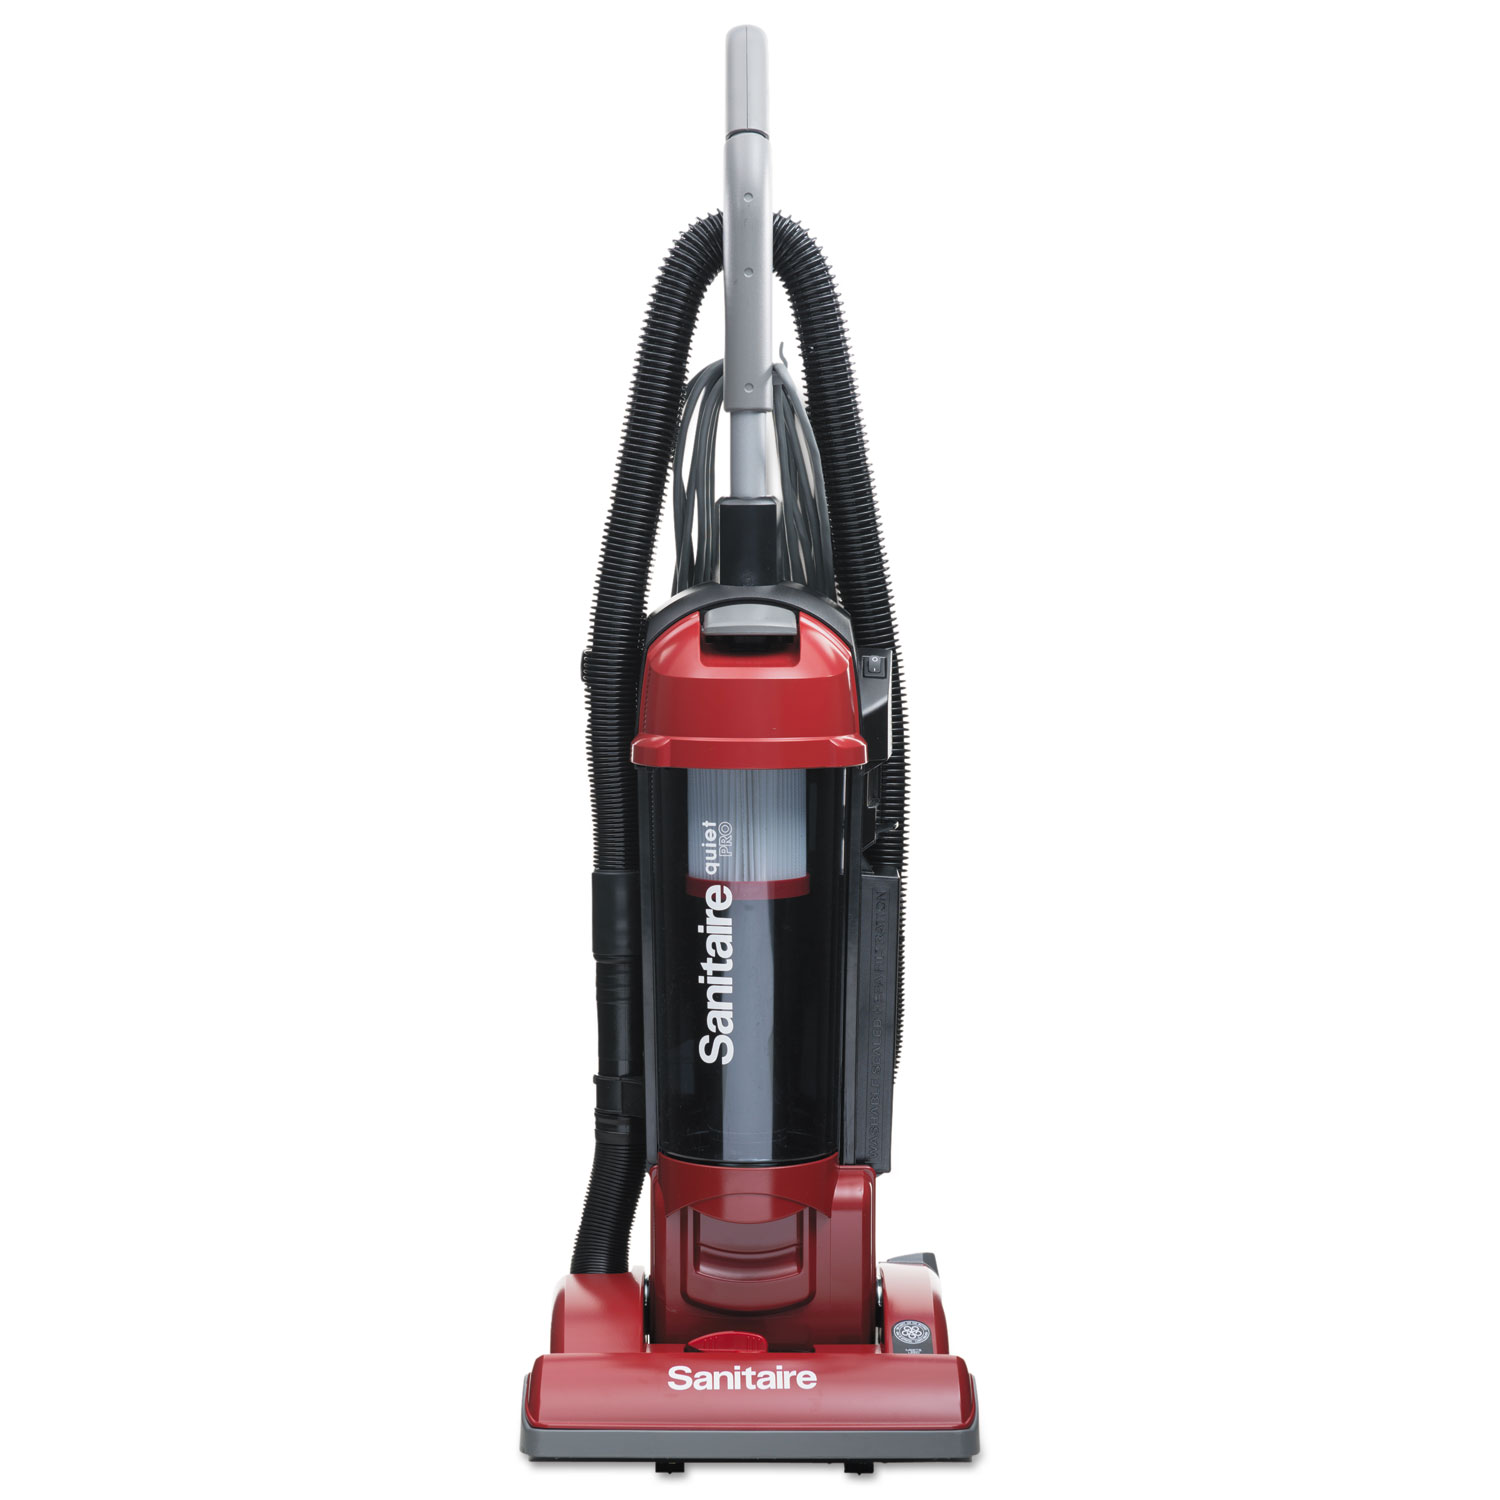  Sanitaire SC5745D FORCE Upright Vacuum with Dust Cup, Sealed HEPA, 17 lb, 3.5 qt, Red (EURSC5745D) 